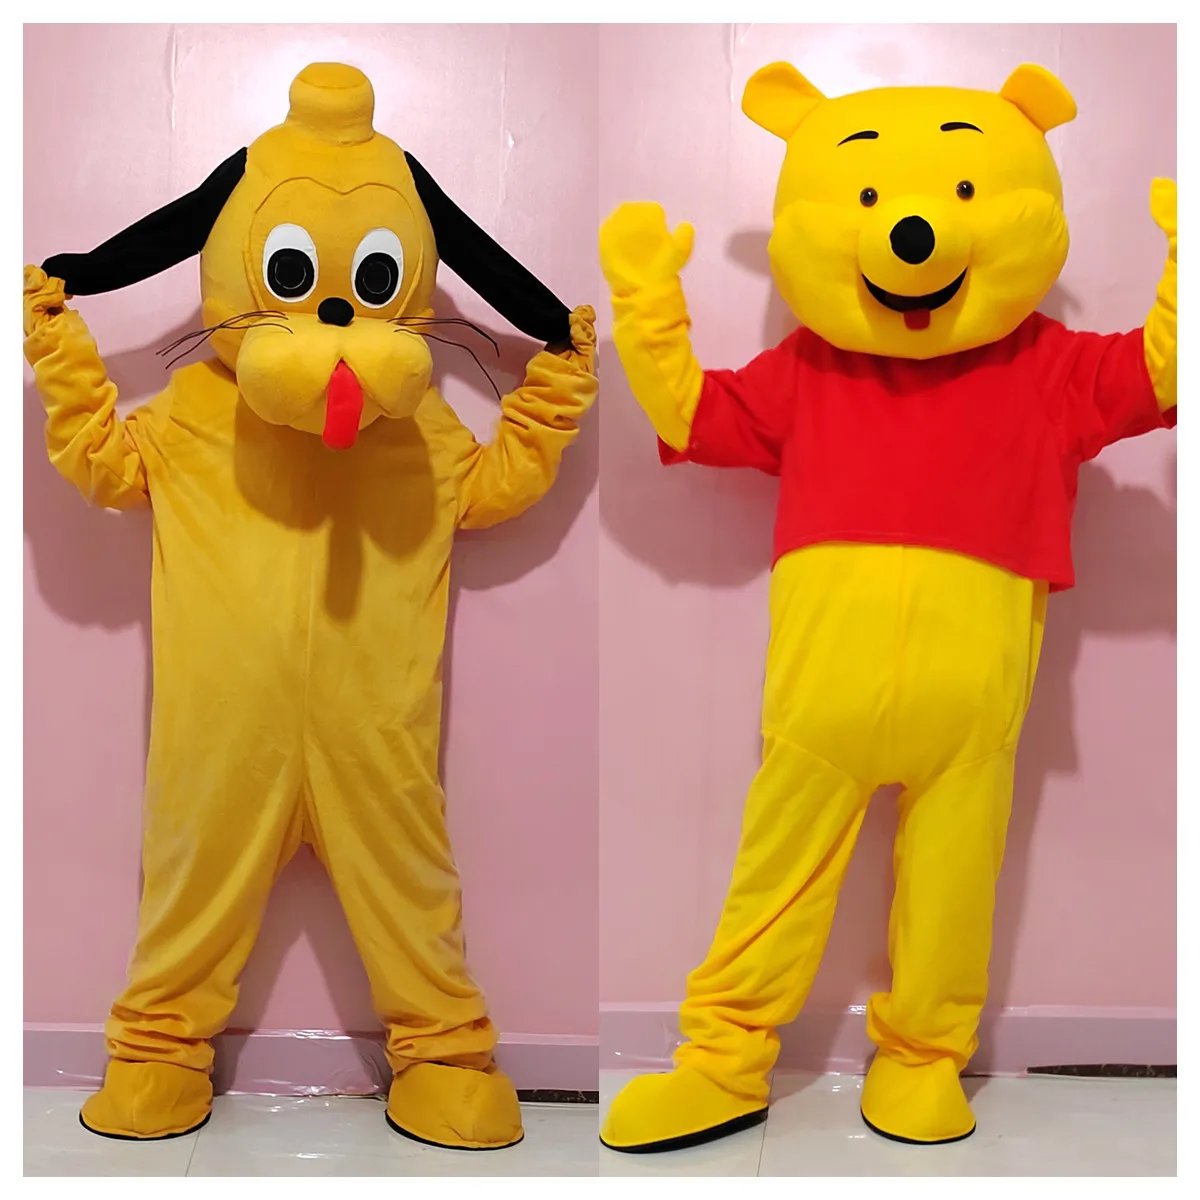 

Cosplay Winnie the Pooh dog Mickey Mouse cartoon character costume mascot costume advertising birthday party animal costume prop